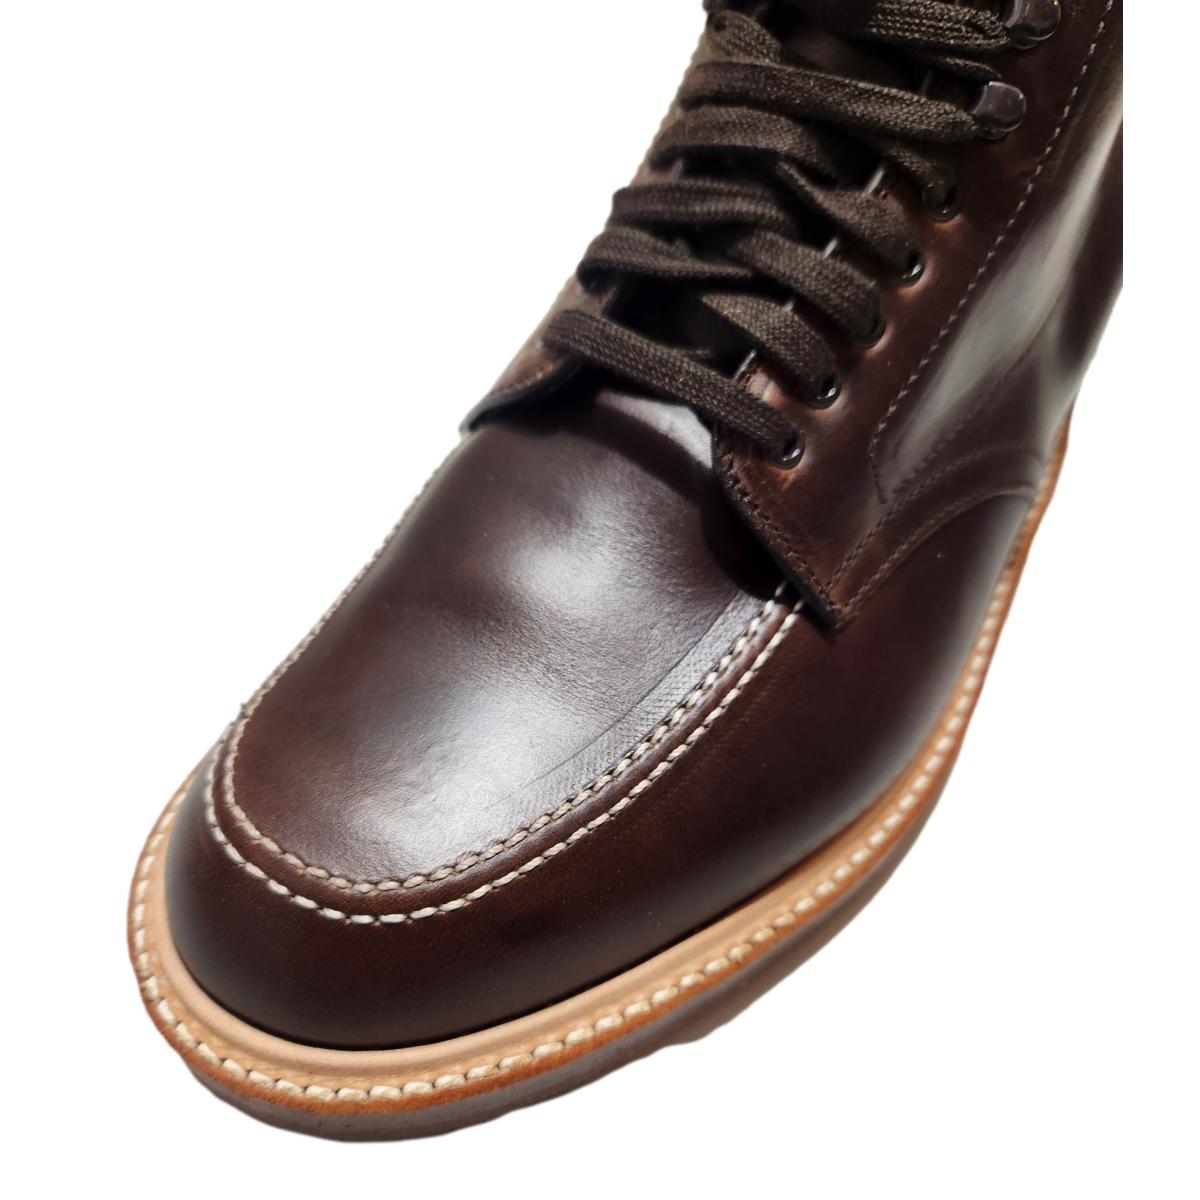 403 ’Indy’ Boot in Brown Aniline Leather - Shoes/Boots